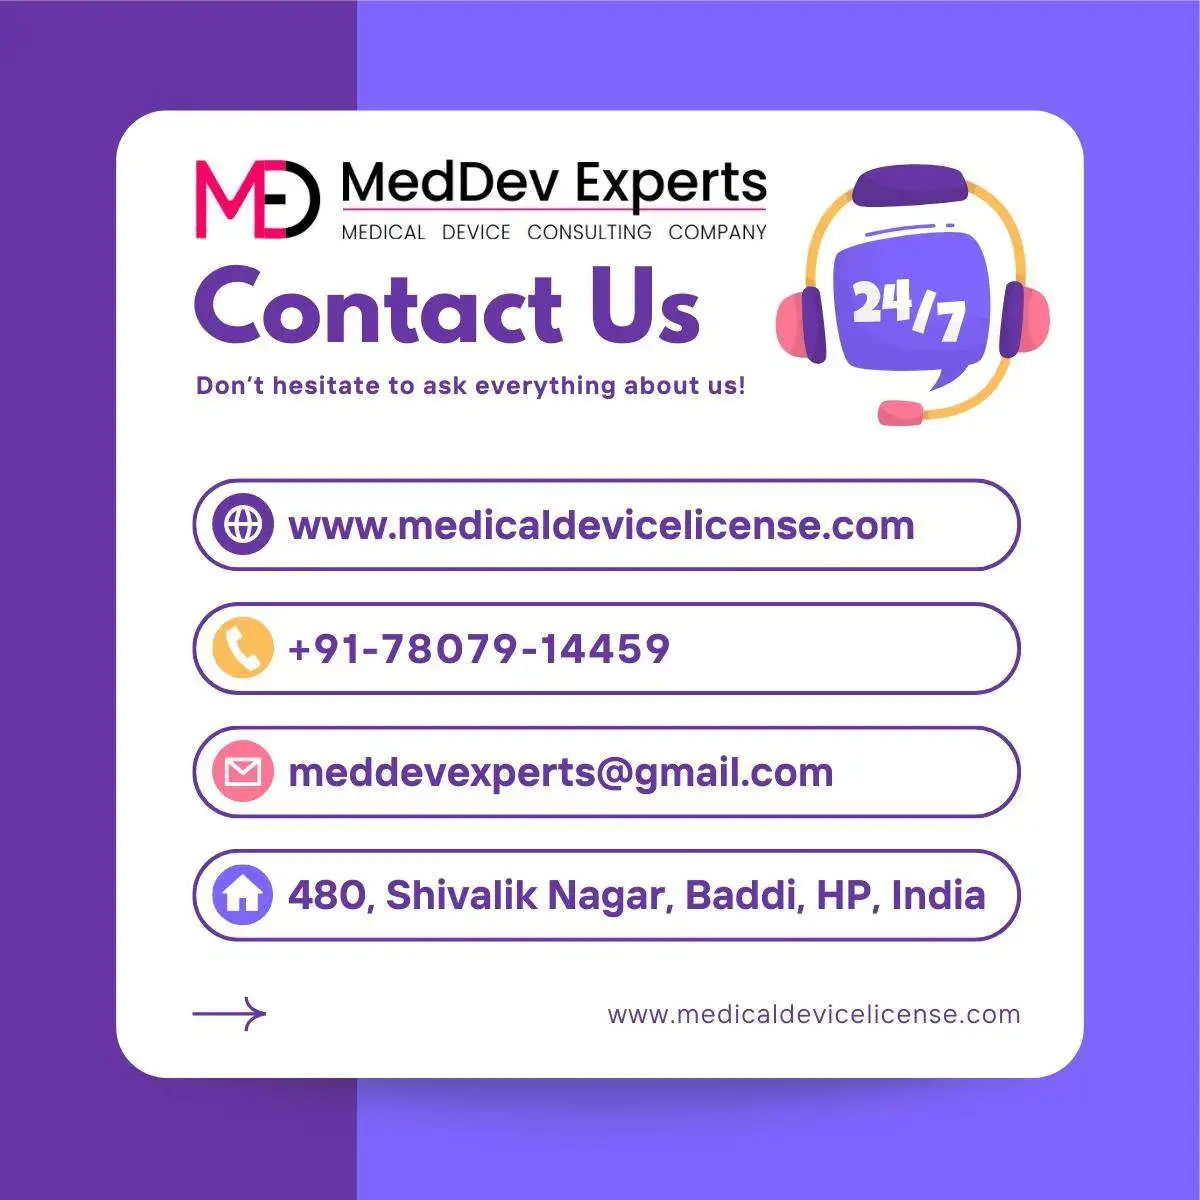 Contact Details of Medical Device Consultant MedDev Experts